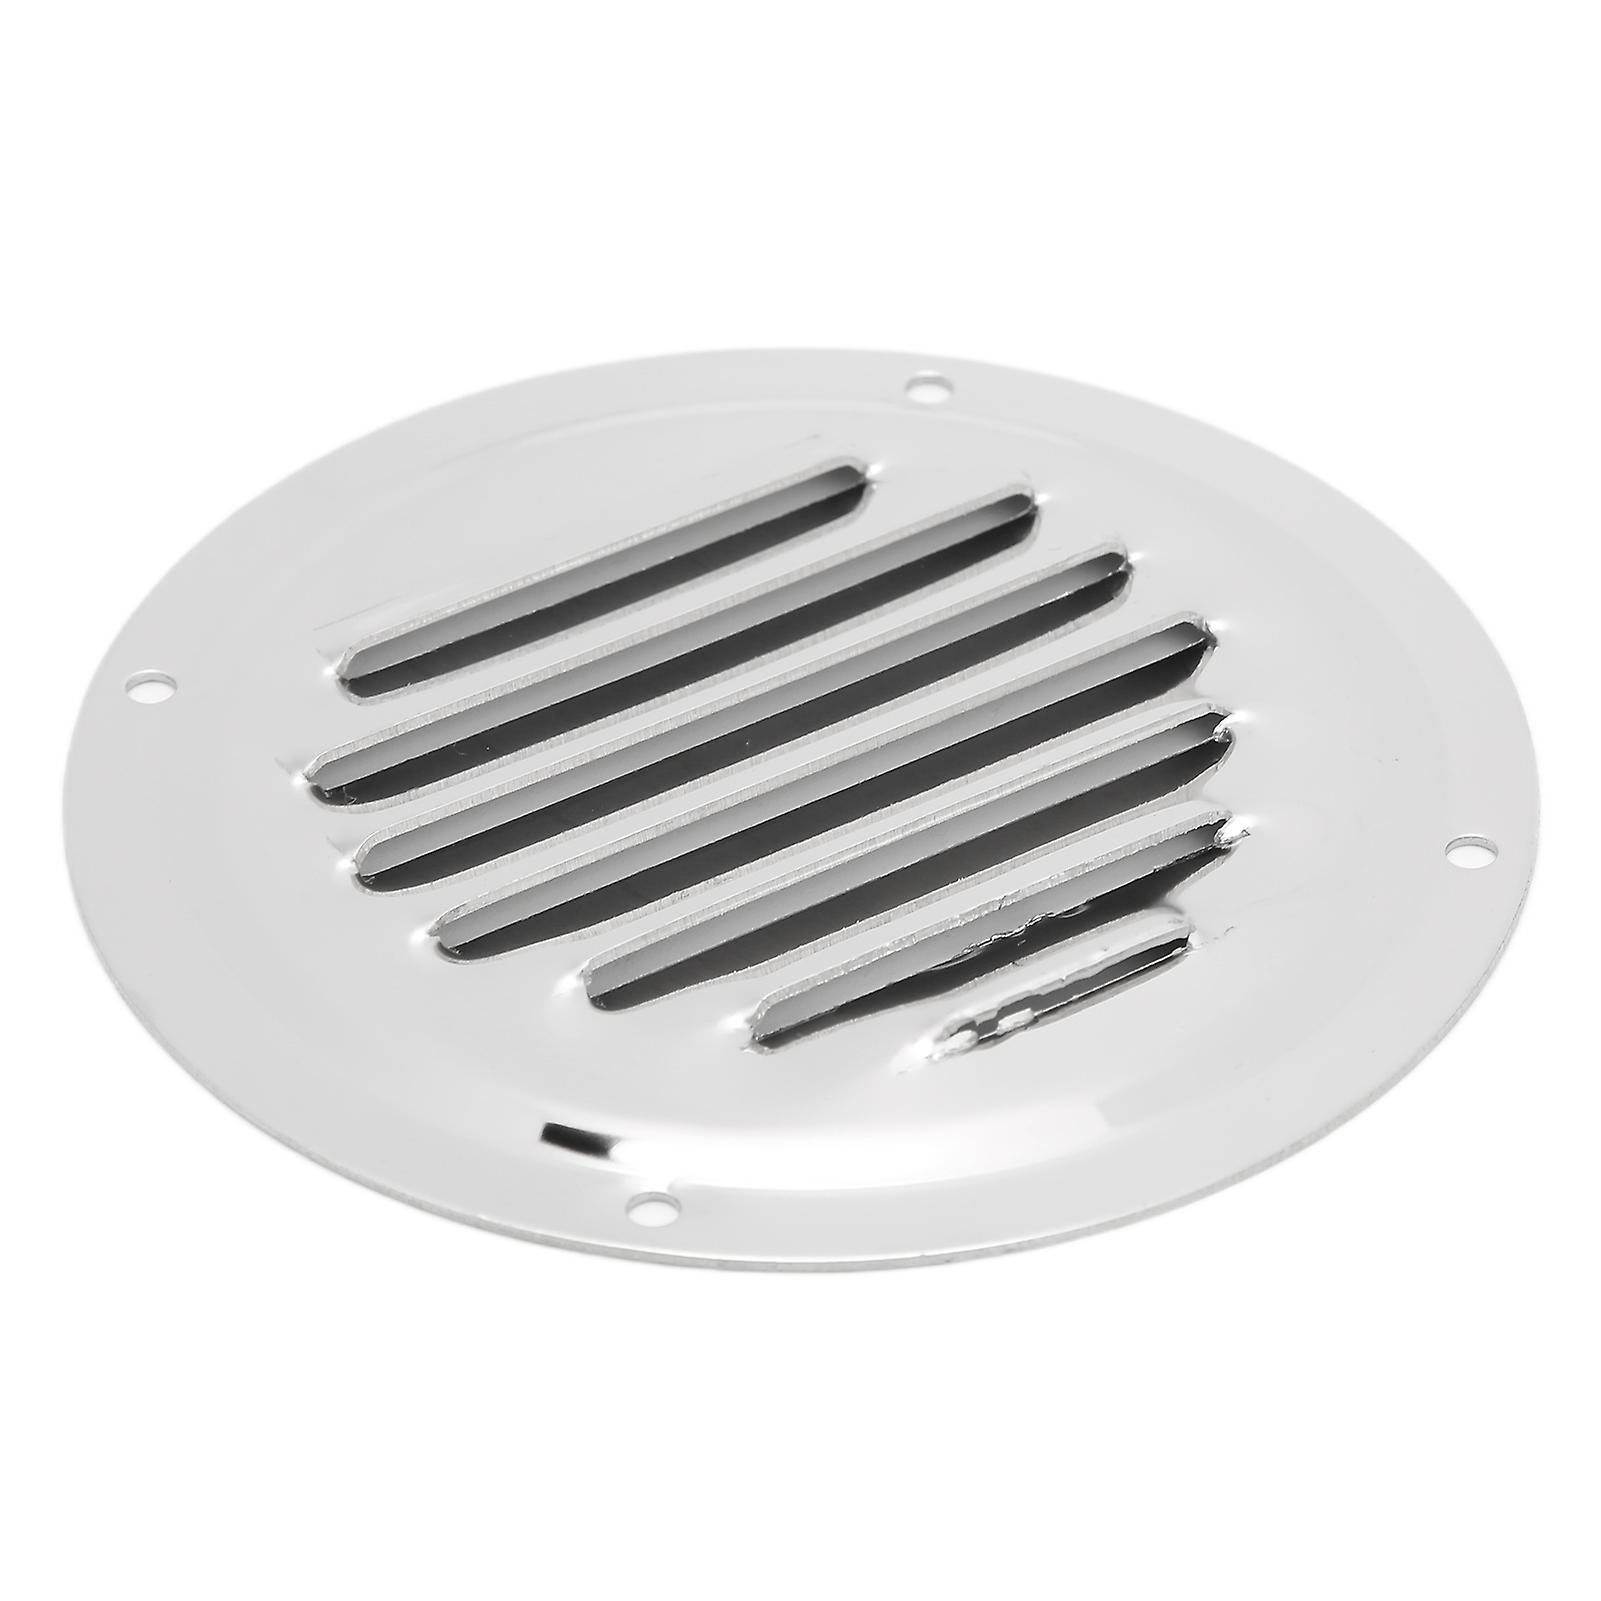 Air Vents Stainless Steel Round Louver Wall Ventilation Outlet For Yacht Caravans Home Kitchen Vents4in(101mm)